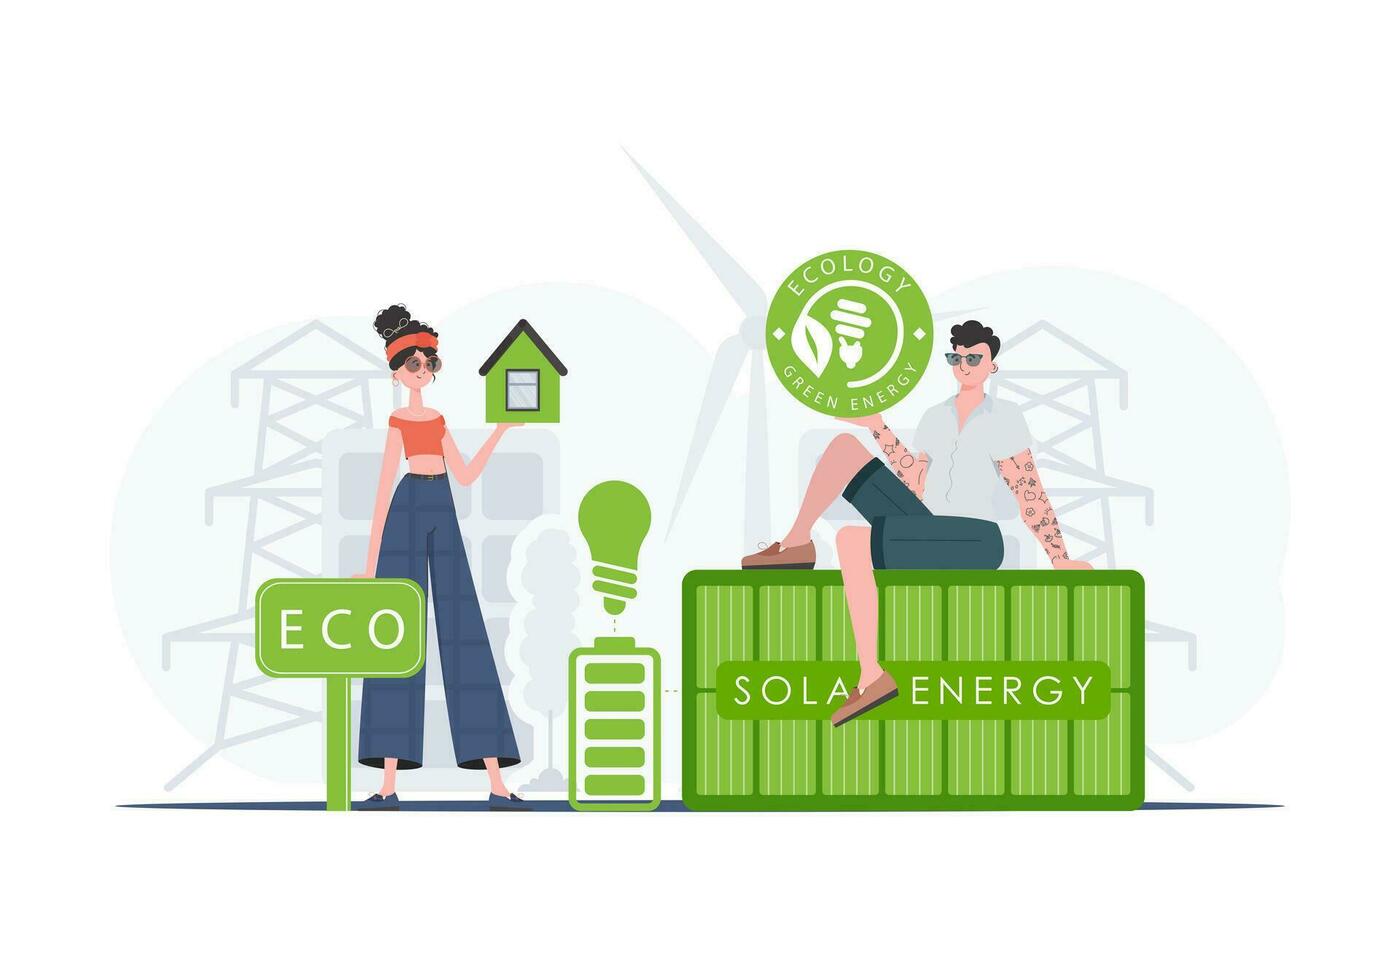 ECO people. The concept of green energy and ecology. trendy style. Vector illustration.